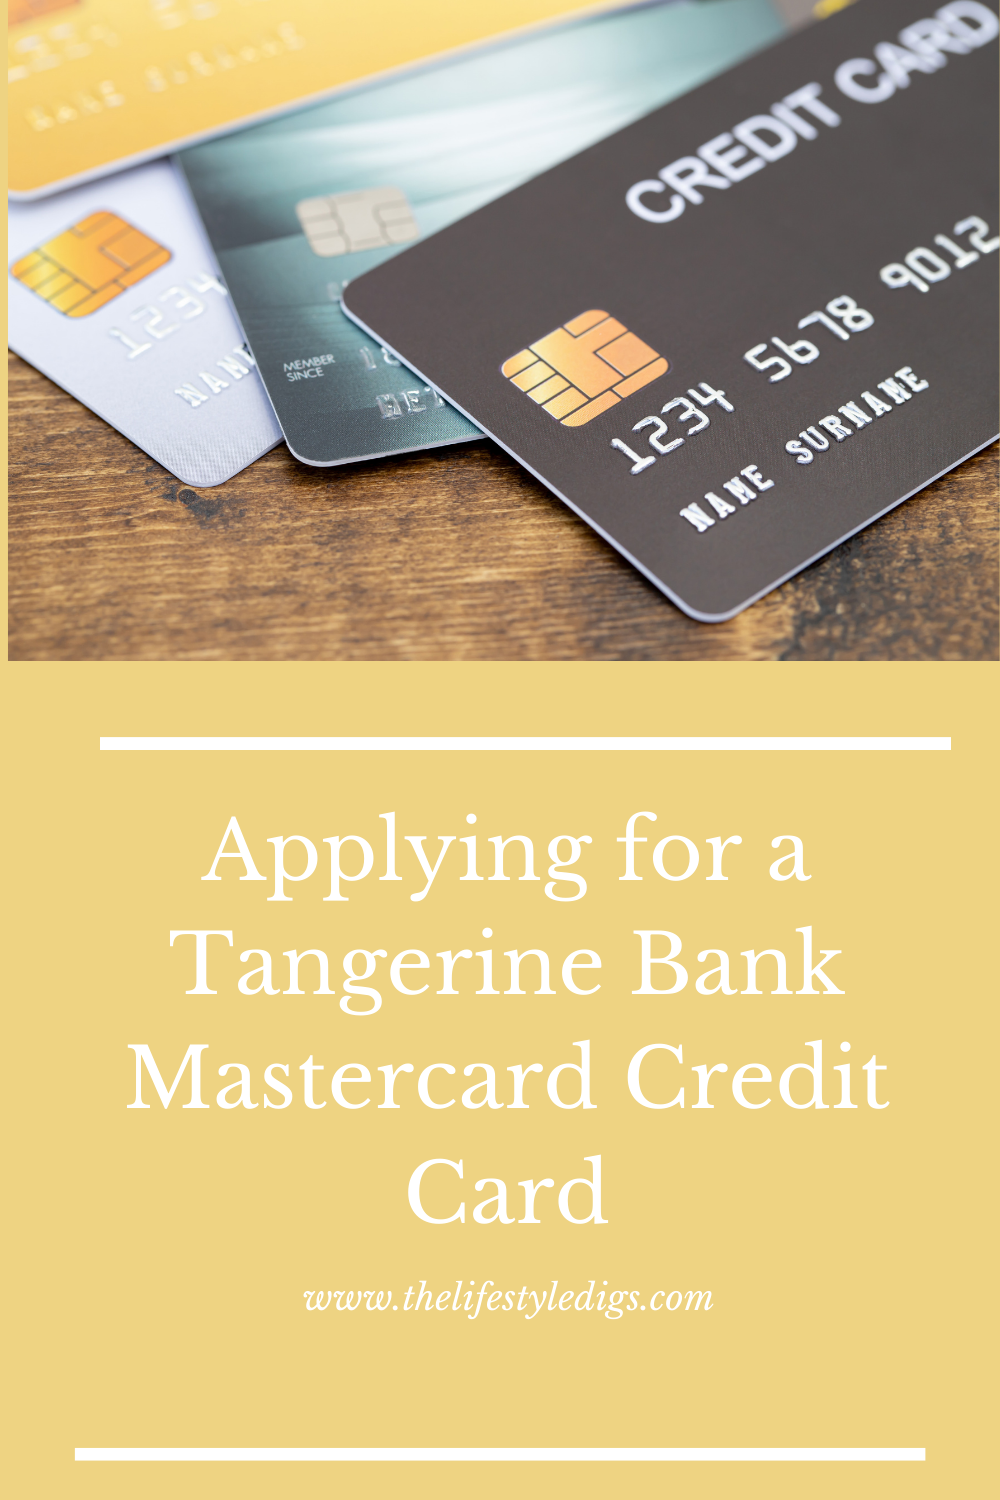 Applying for a Tangerine Bank Mastercard Credit Card